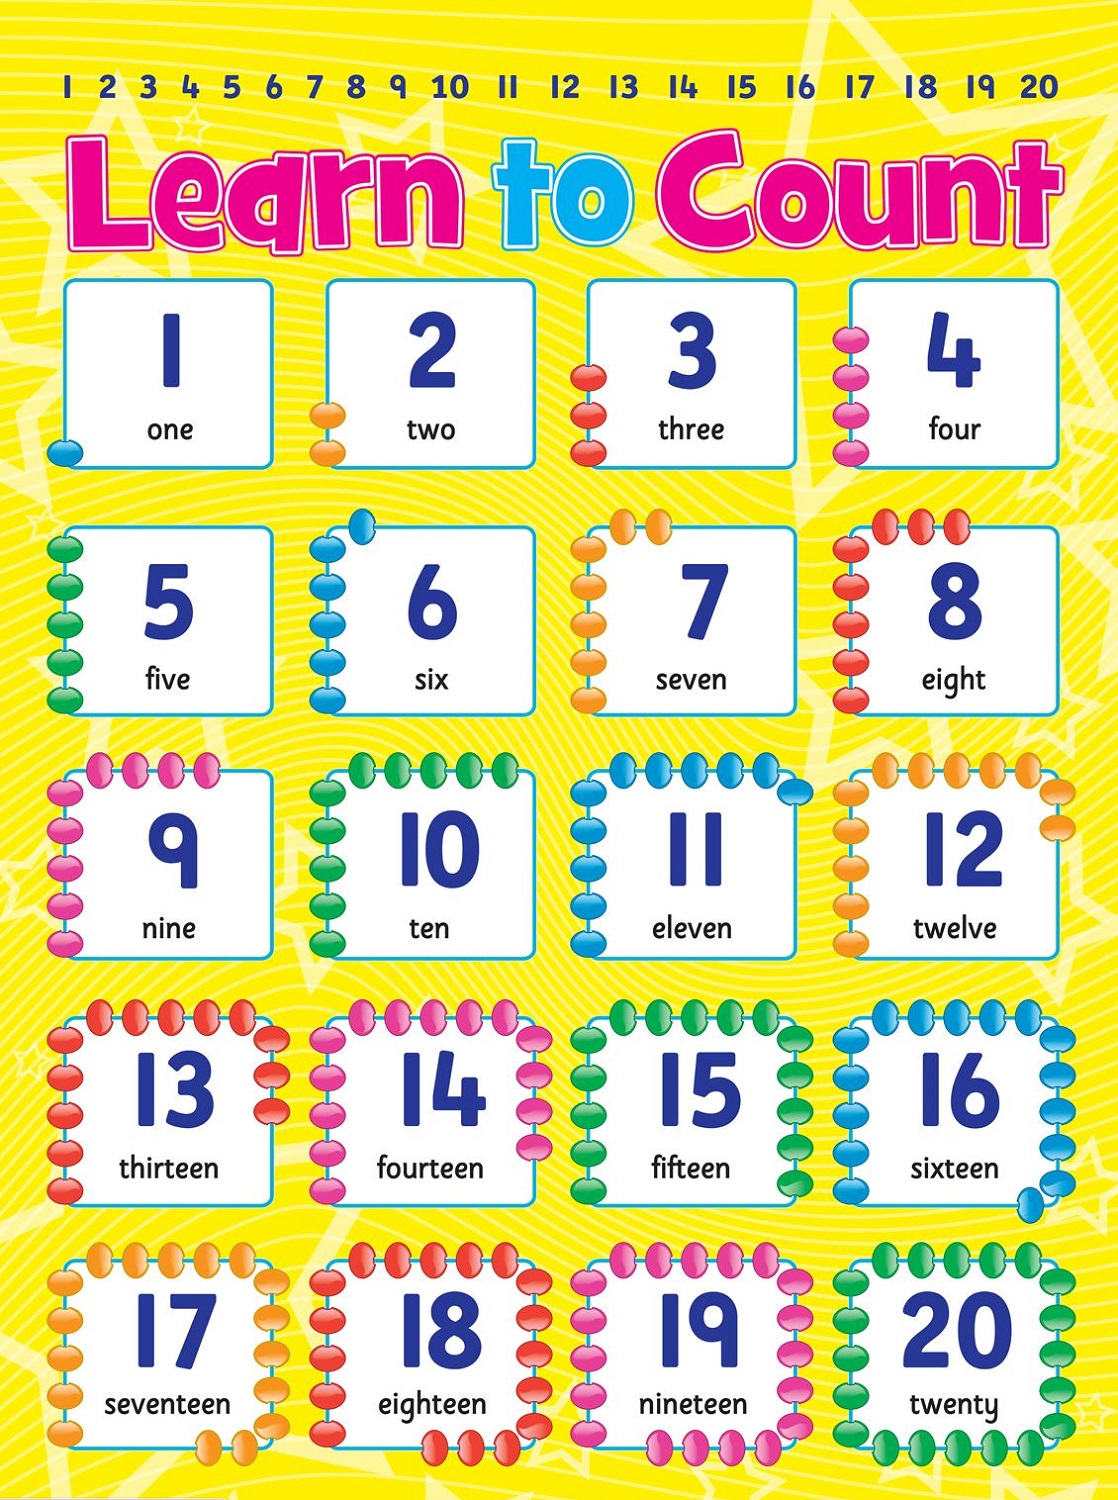 Learn to Count 1-20 Number Chart